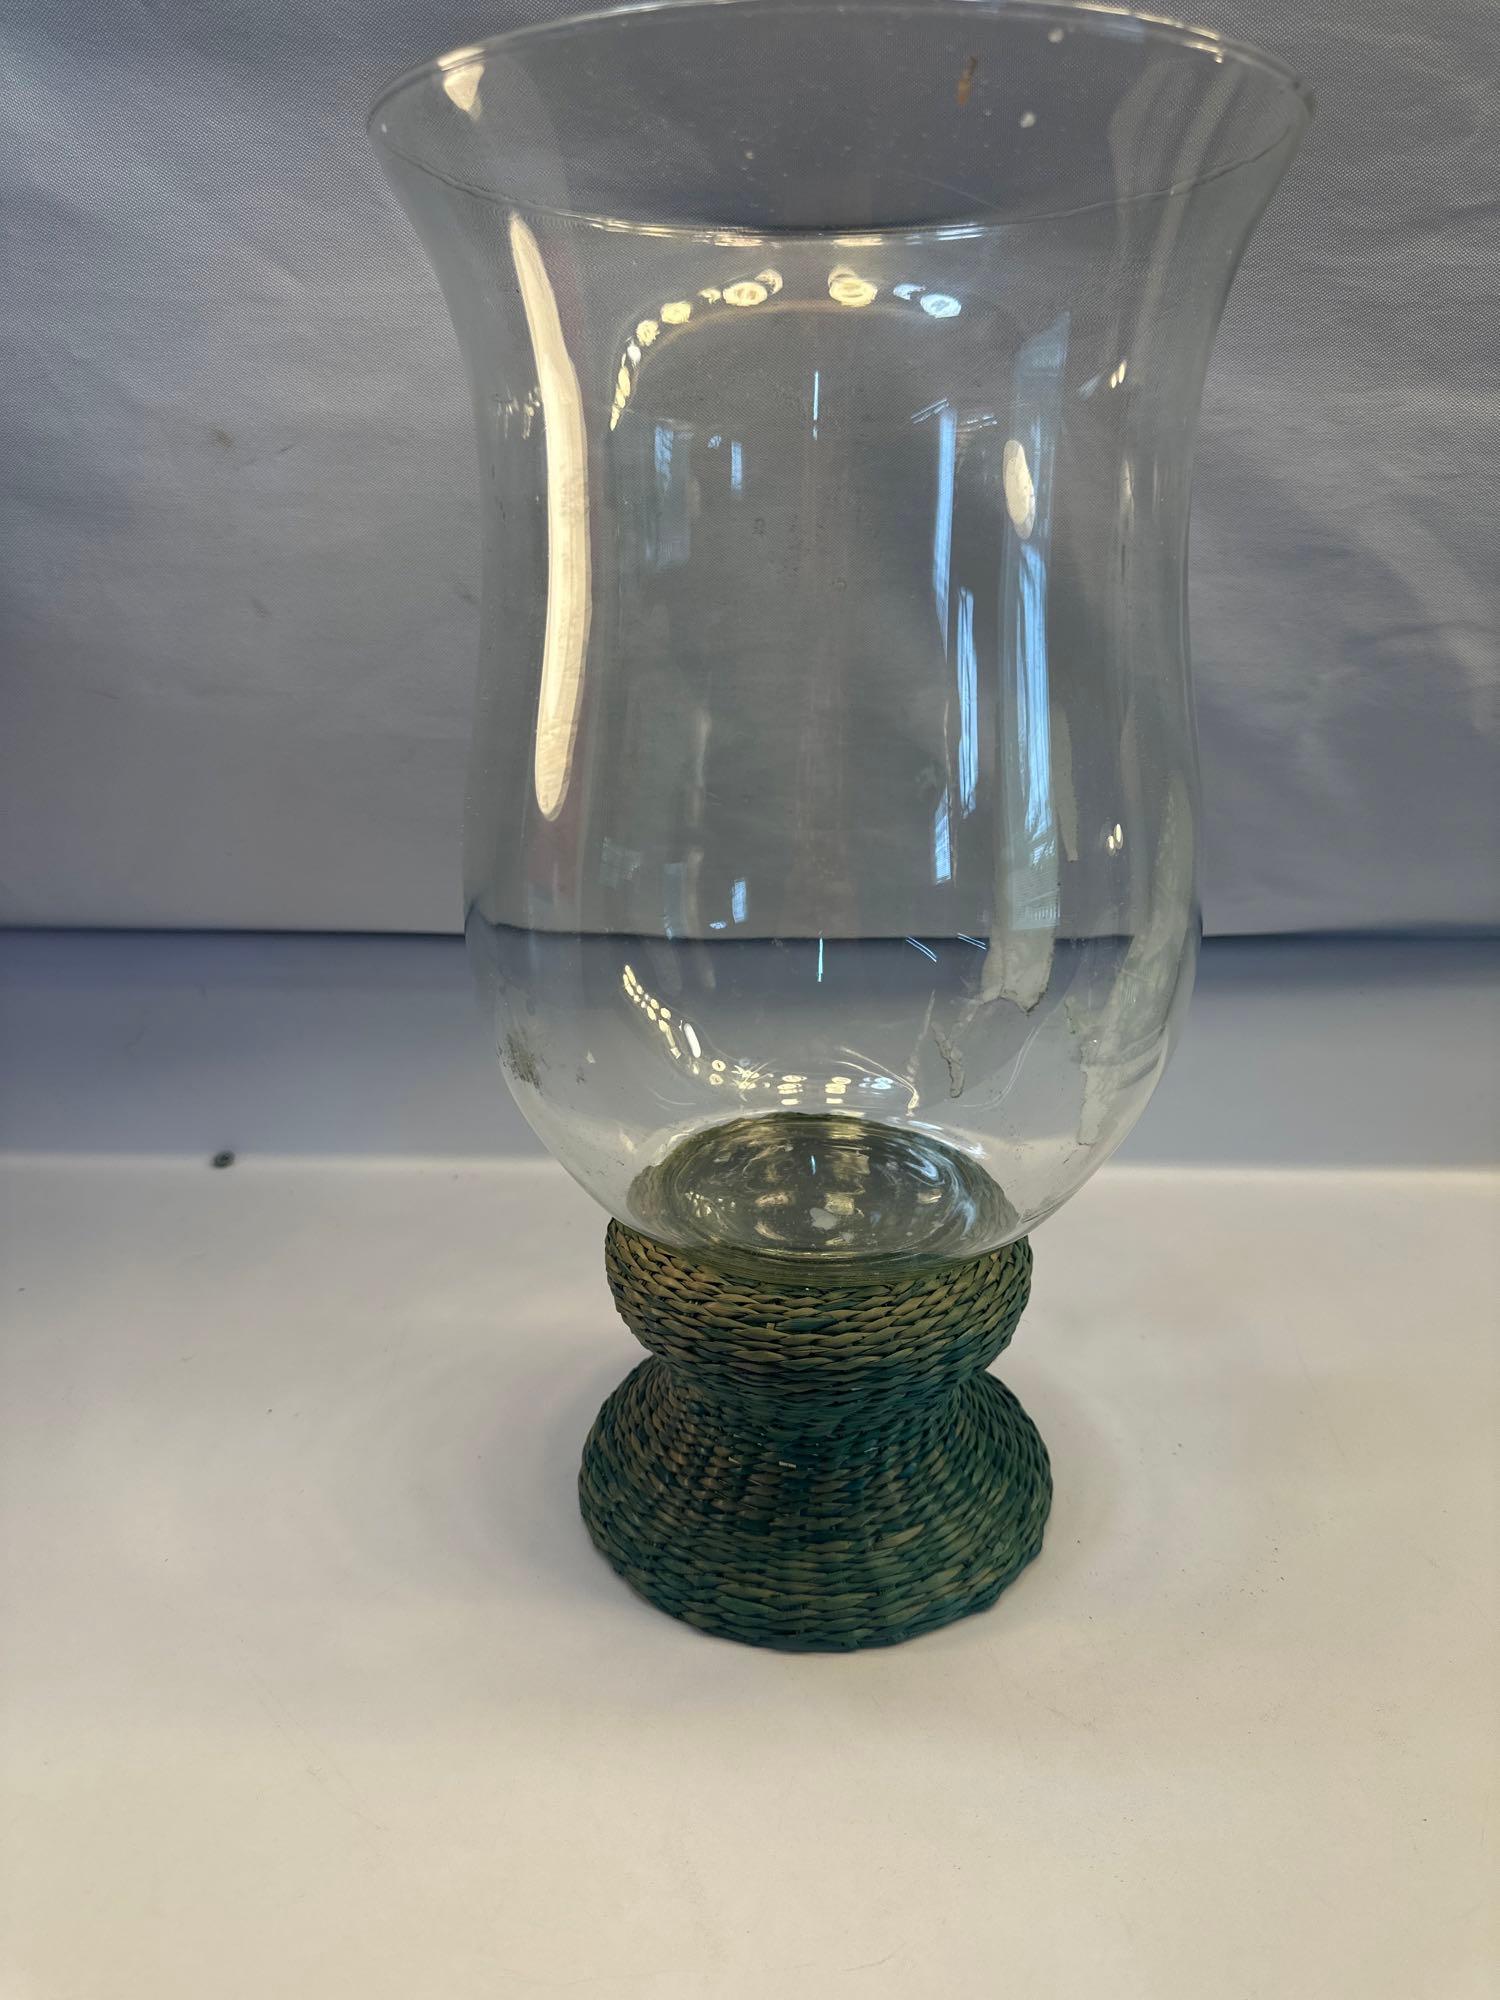 Large Glass Candle Holder With Wicker Bottom